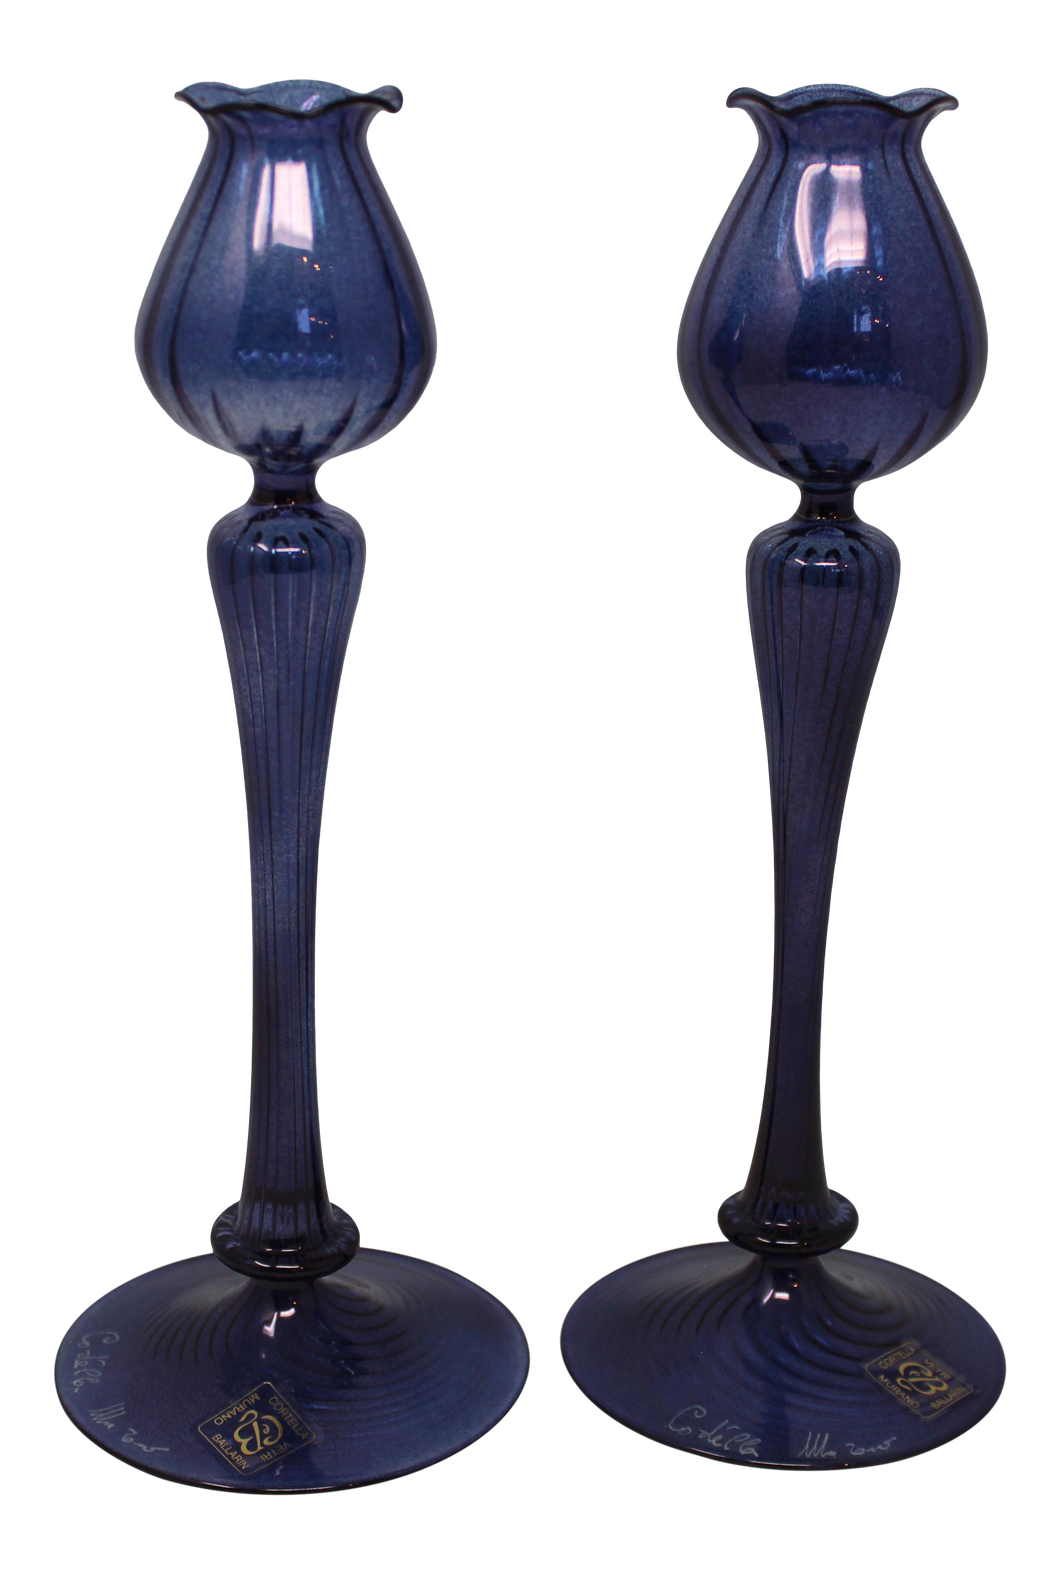 Contemporary Murano Candle Holders by Ballarin - a Pair